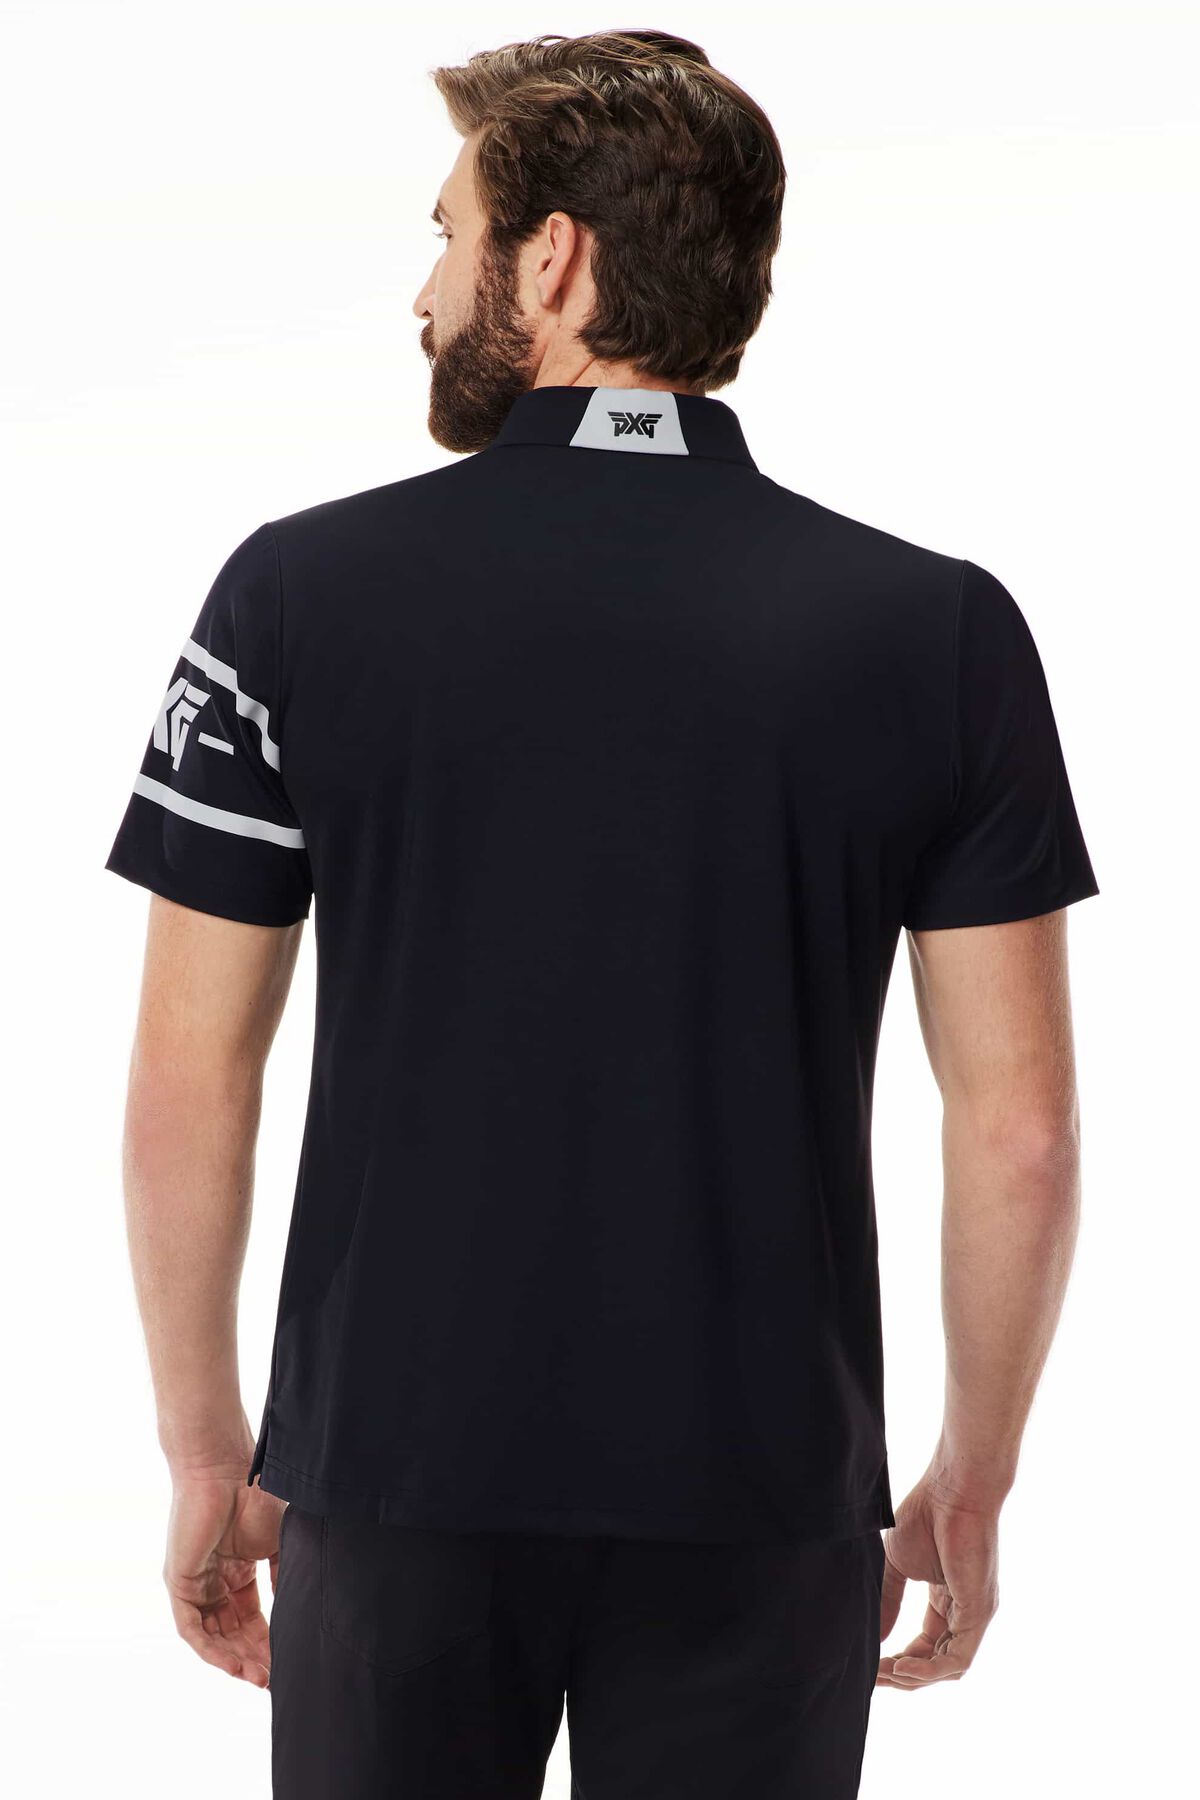 Athletic Fit Racer Polo Black